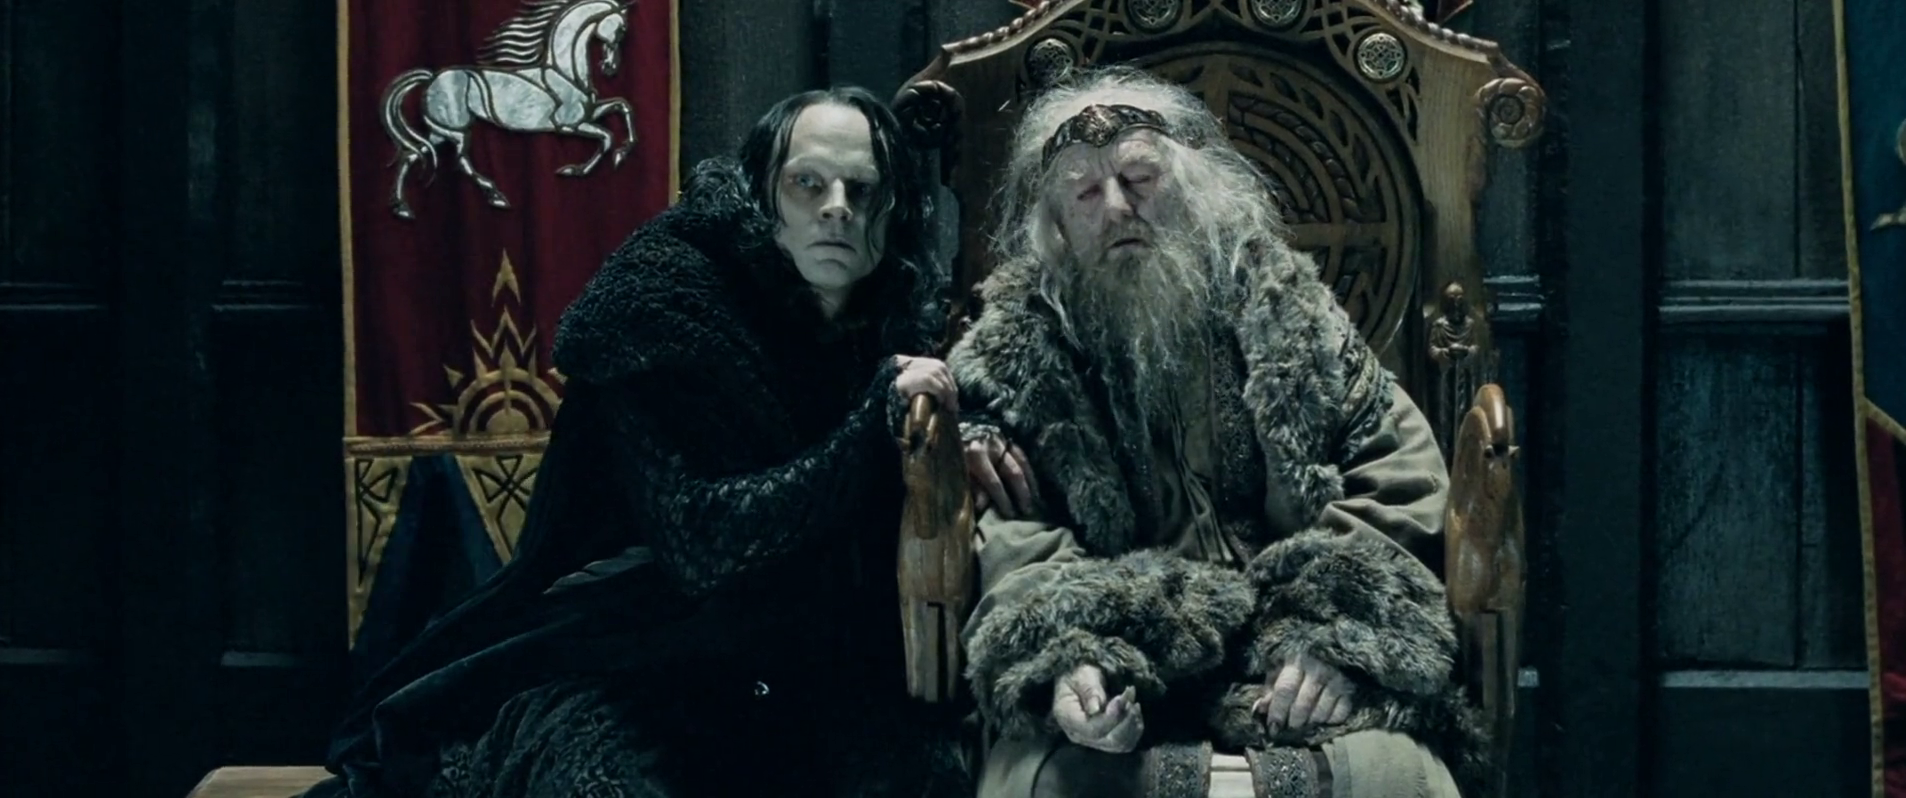 Grima_and_King_Theoden_-_Two_Towers.png